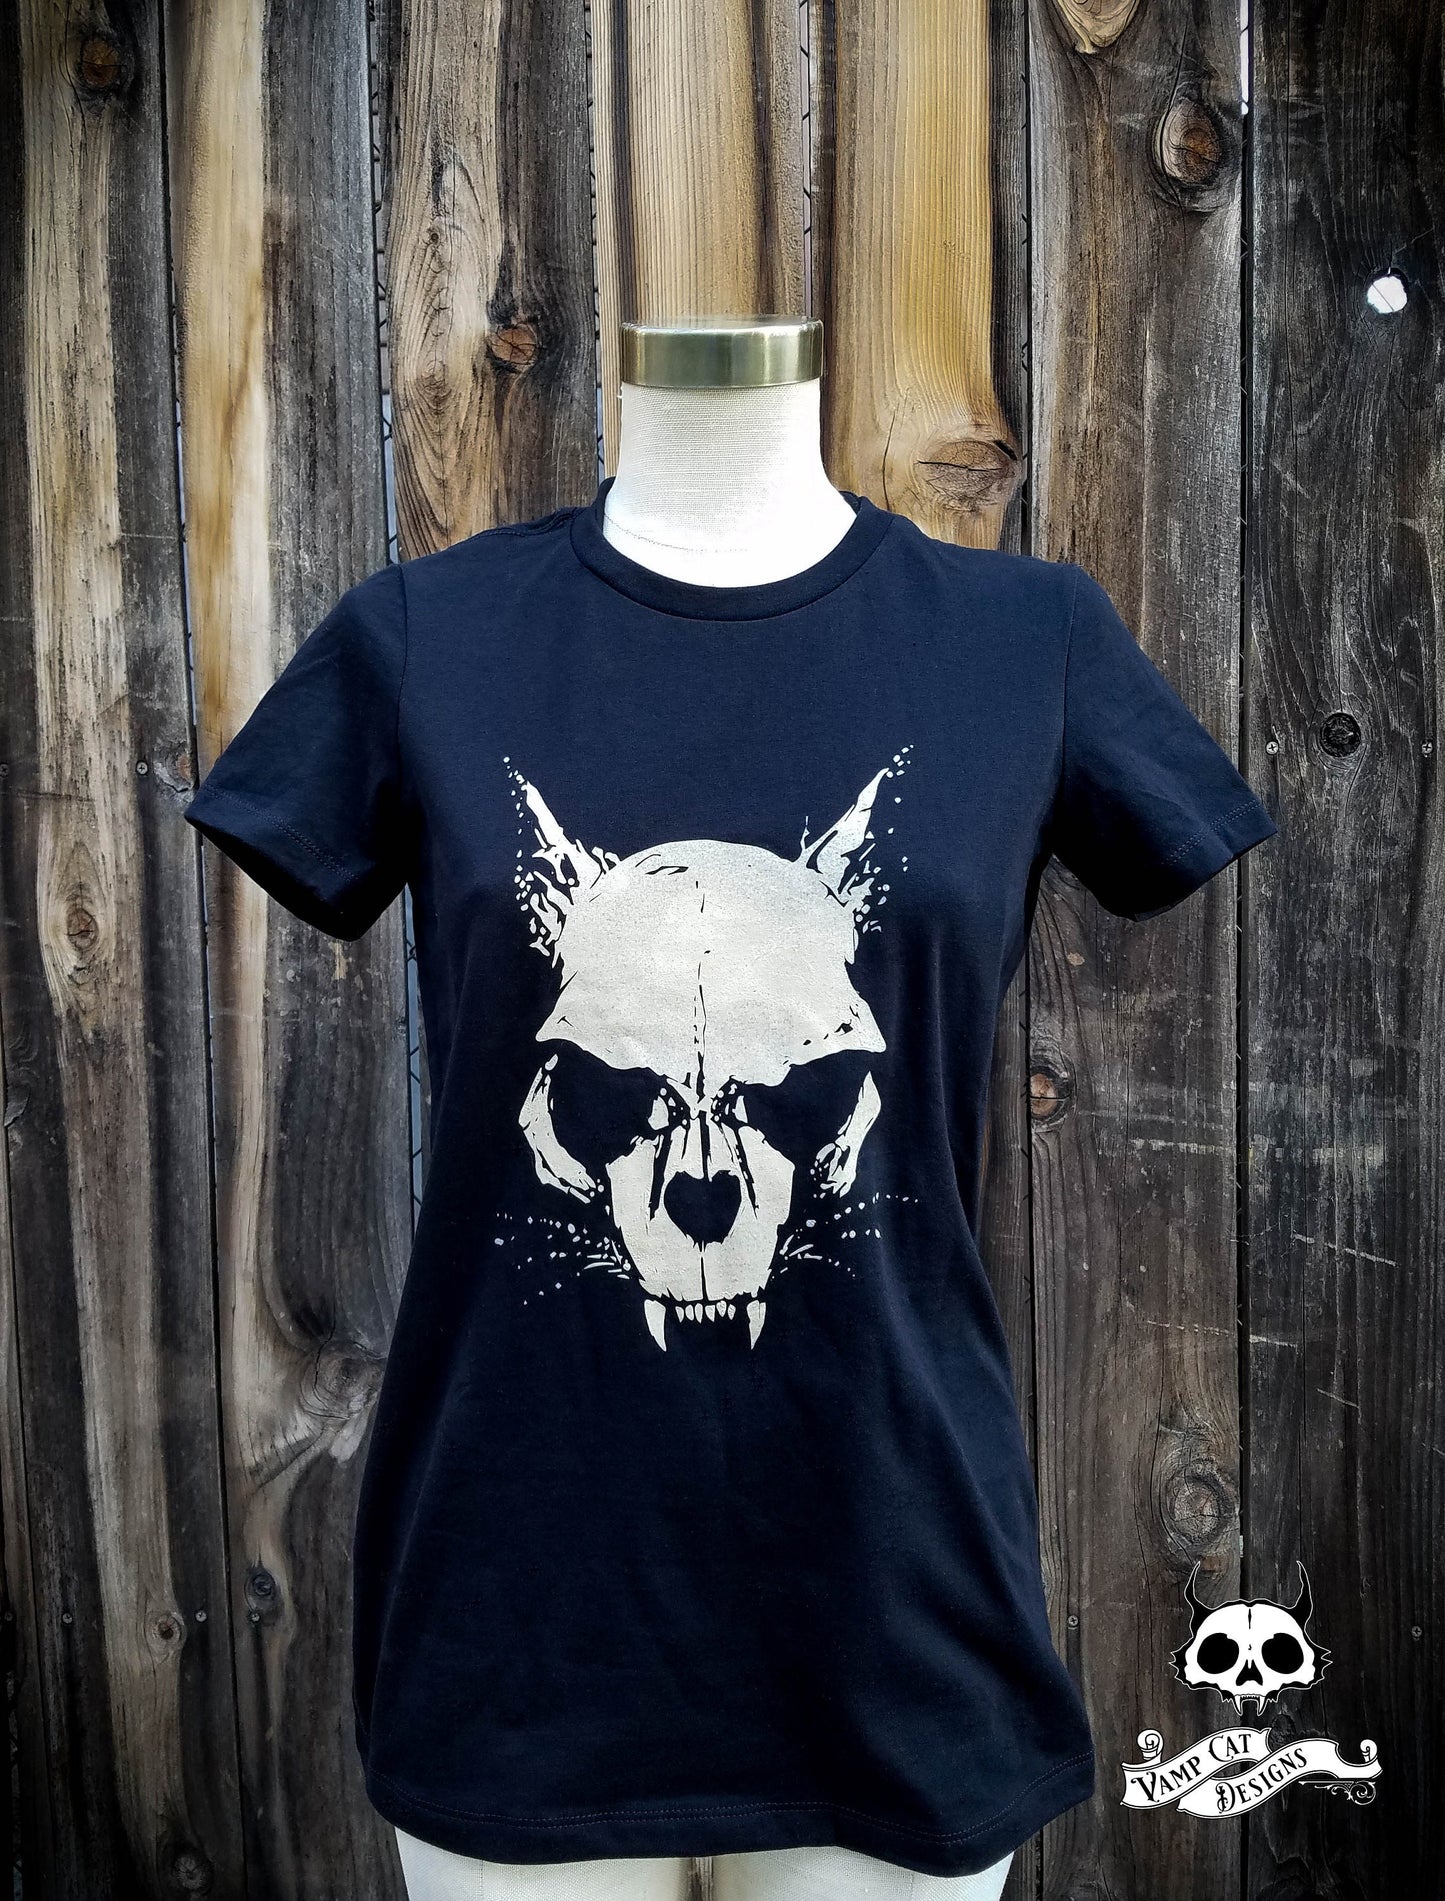 Skull Cat-Women's Tee-Dark Apparel-Cat Lover-Cats-Macabre-Cat Art-Evil Cat-Witchy-Cat Shirt-Cat Skull-Gifts For Her-Gothic Gifts-Rocker Tee